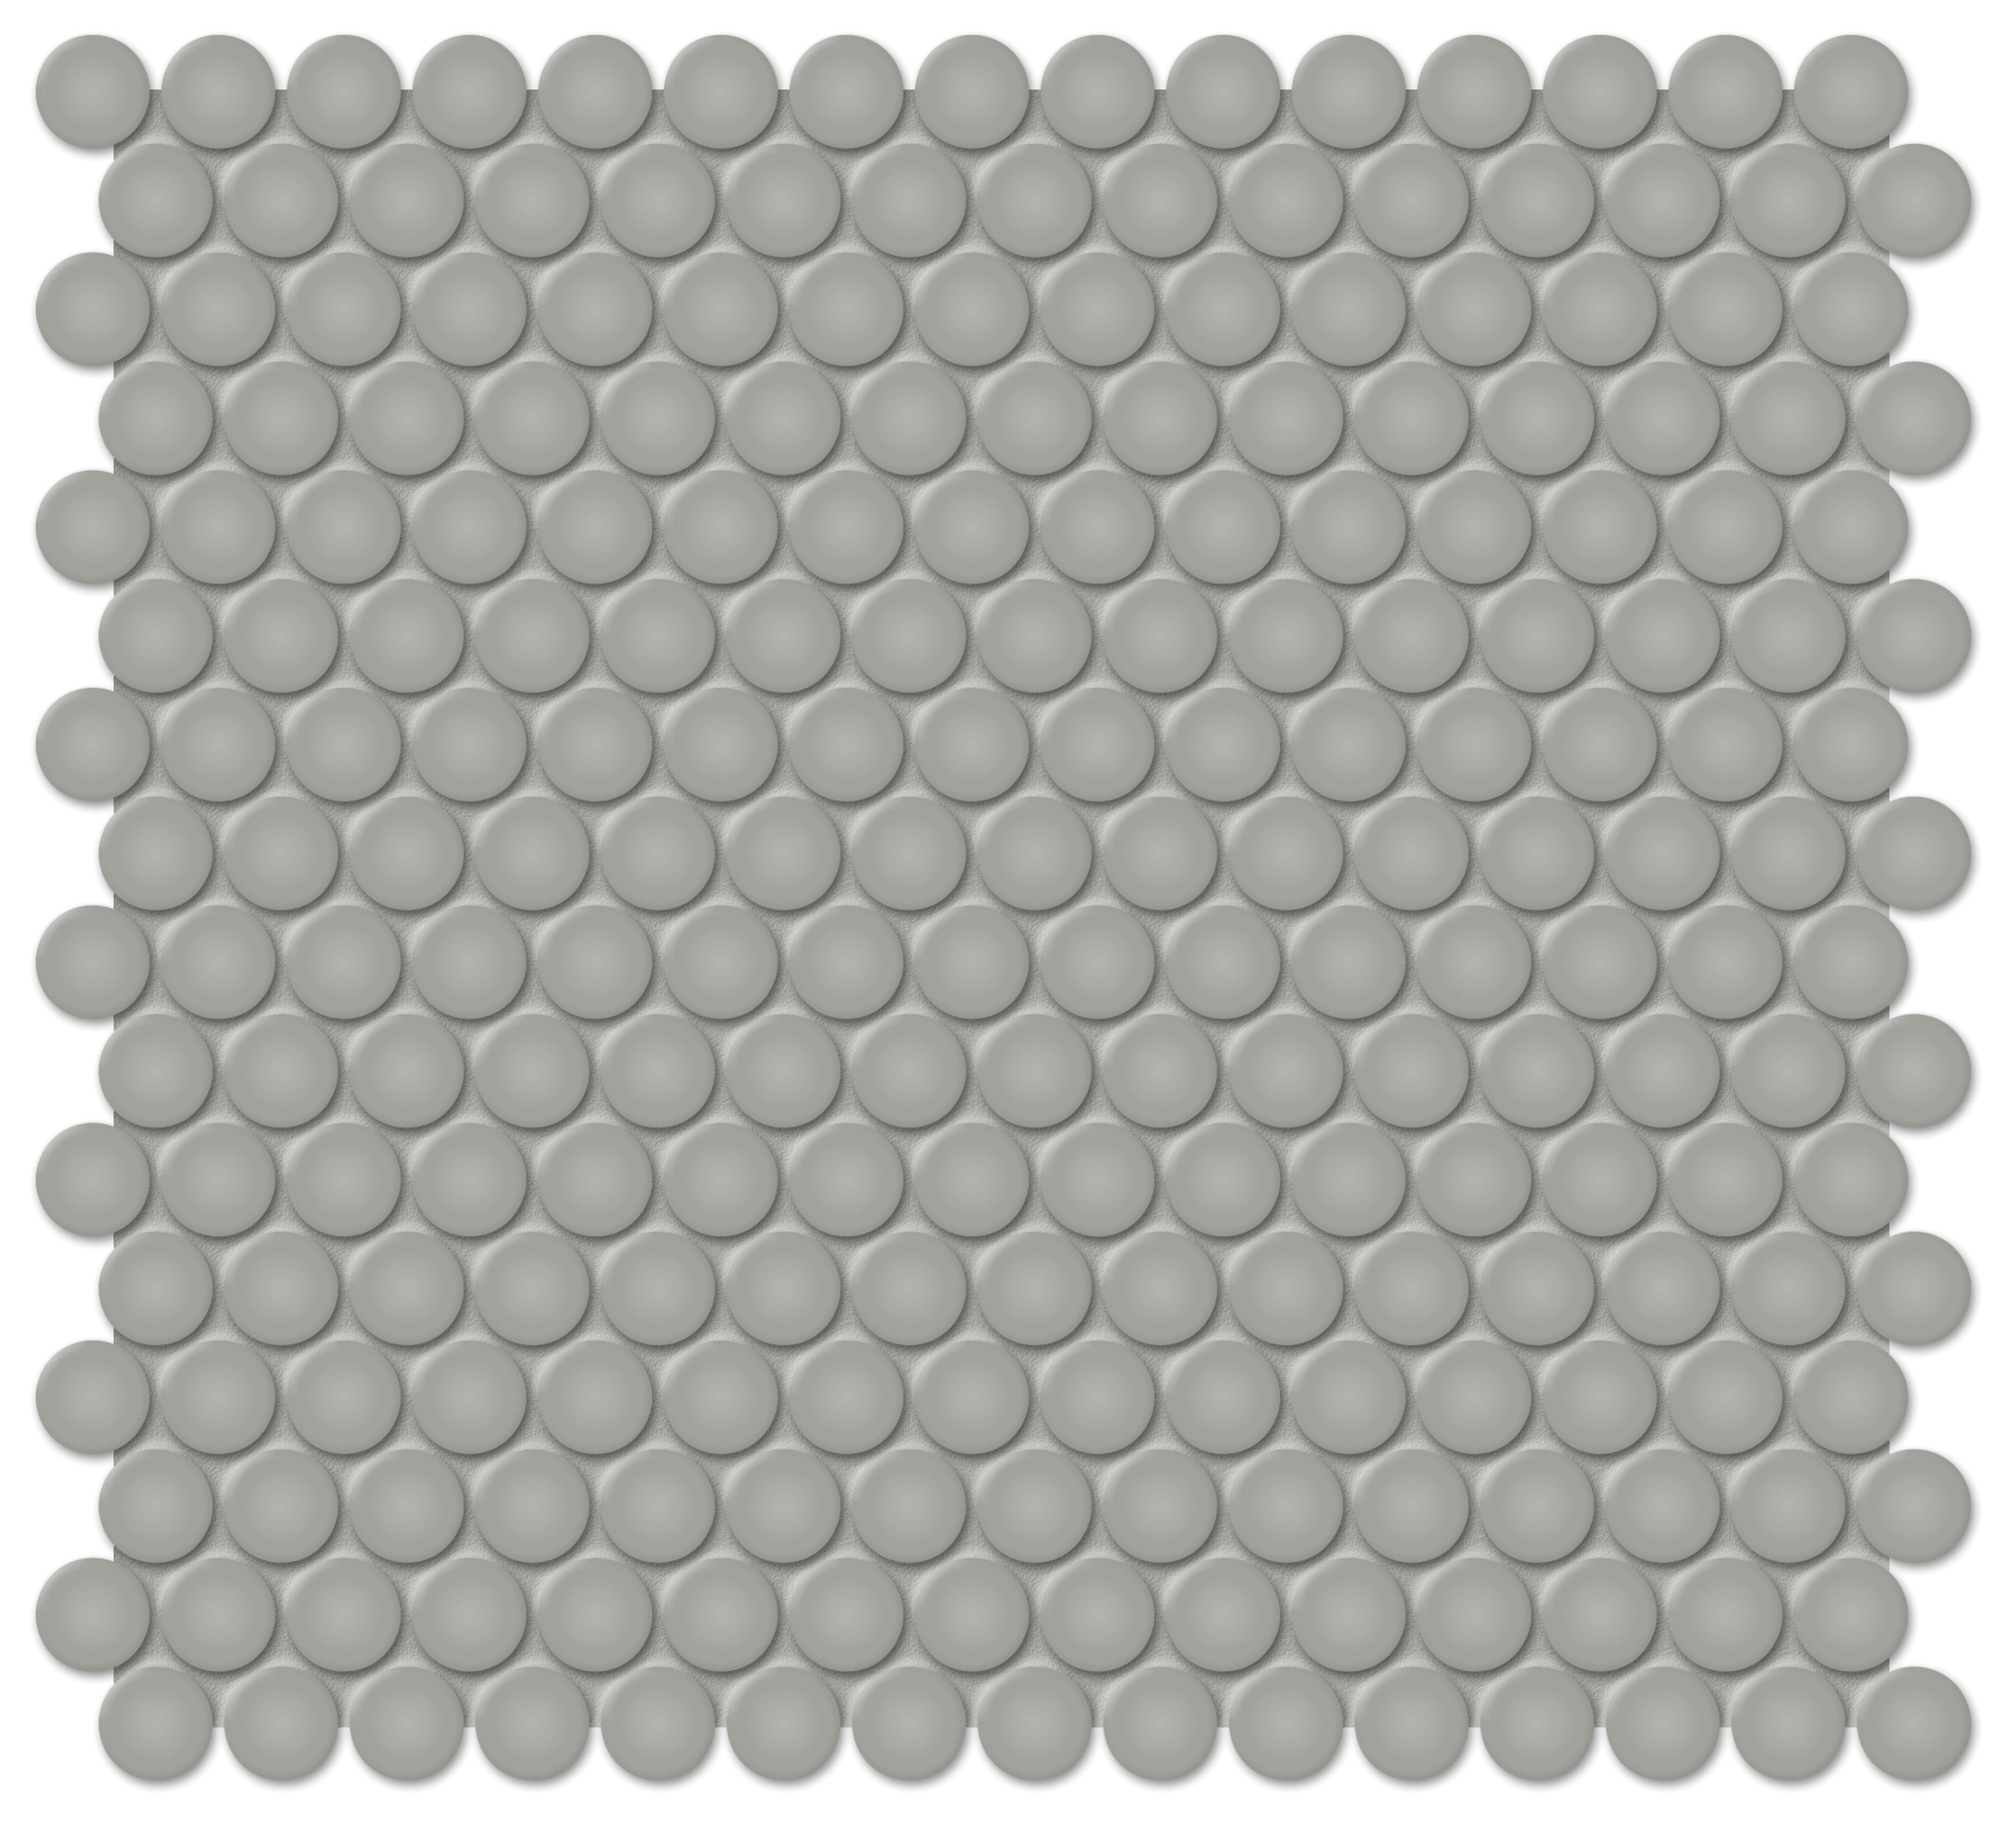 cement chic penny round 3_4-inch pattern glazed porcelain mosaic from soho anatolia collection distributed by surface group international matte finish pressed edge mesh shape